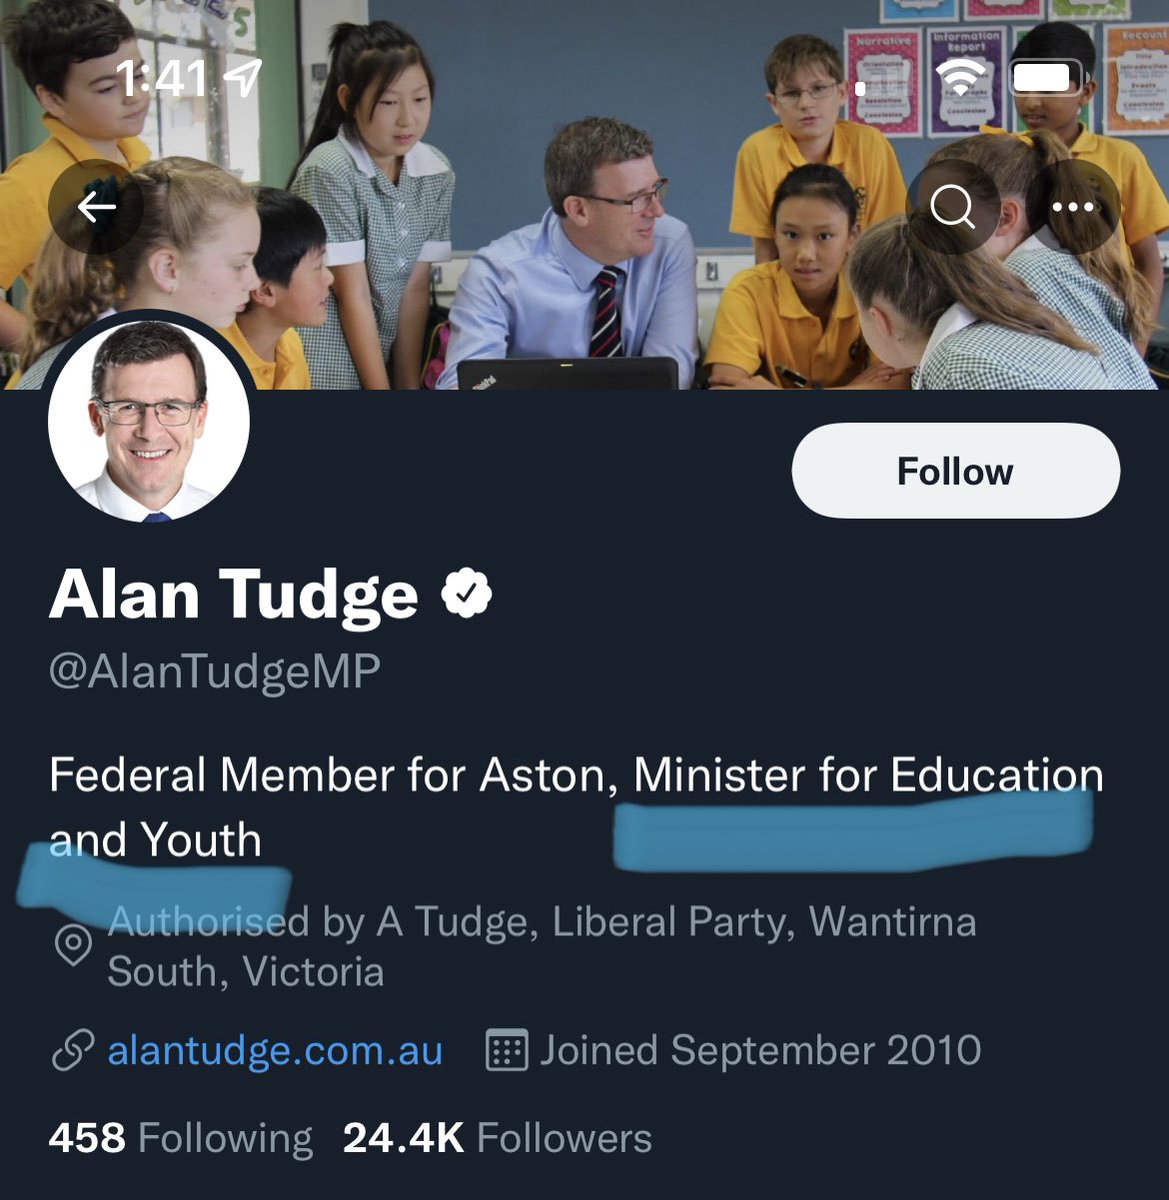 RT @tonymdolan: @murpharoo He might want to update his twitter profile. https://t.co/9zfQE5Dxpk